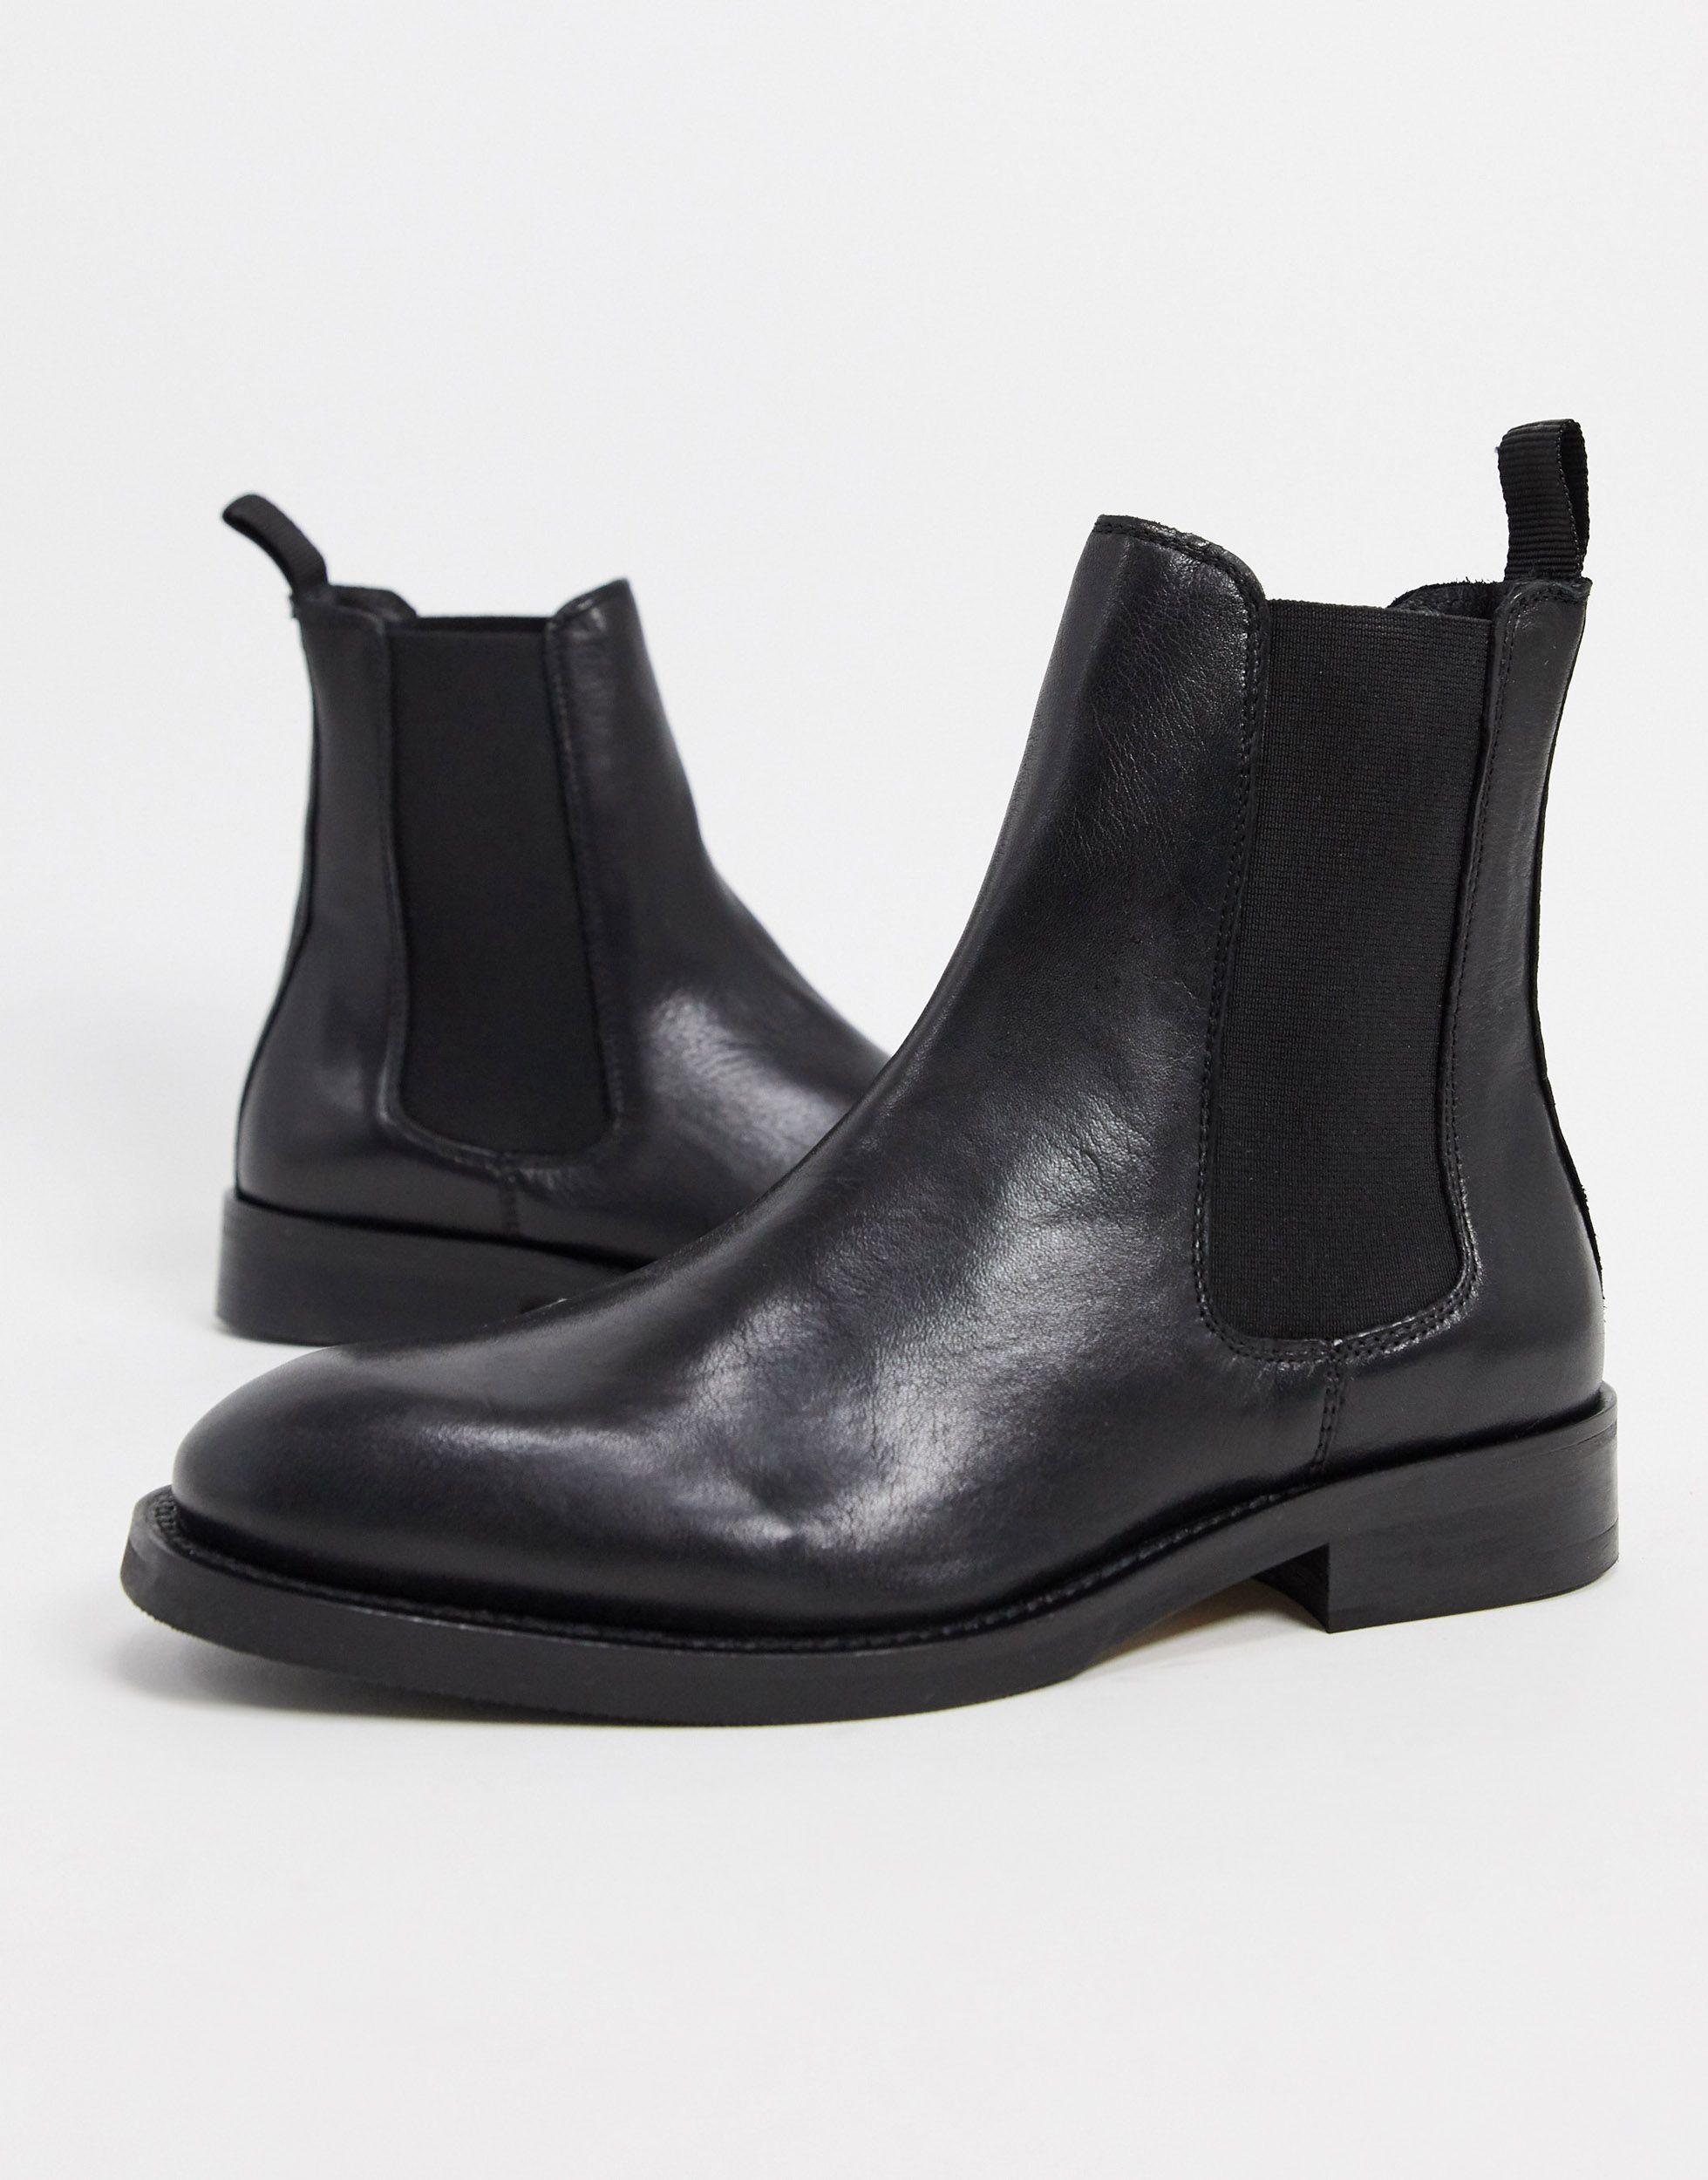 SELECTED Femme Leather Chelsea Boots in Black | Lyst